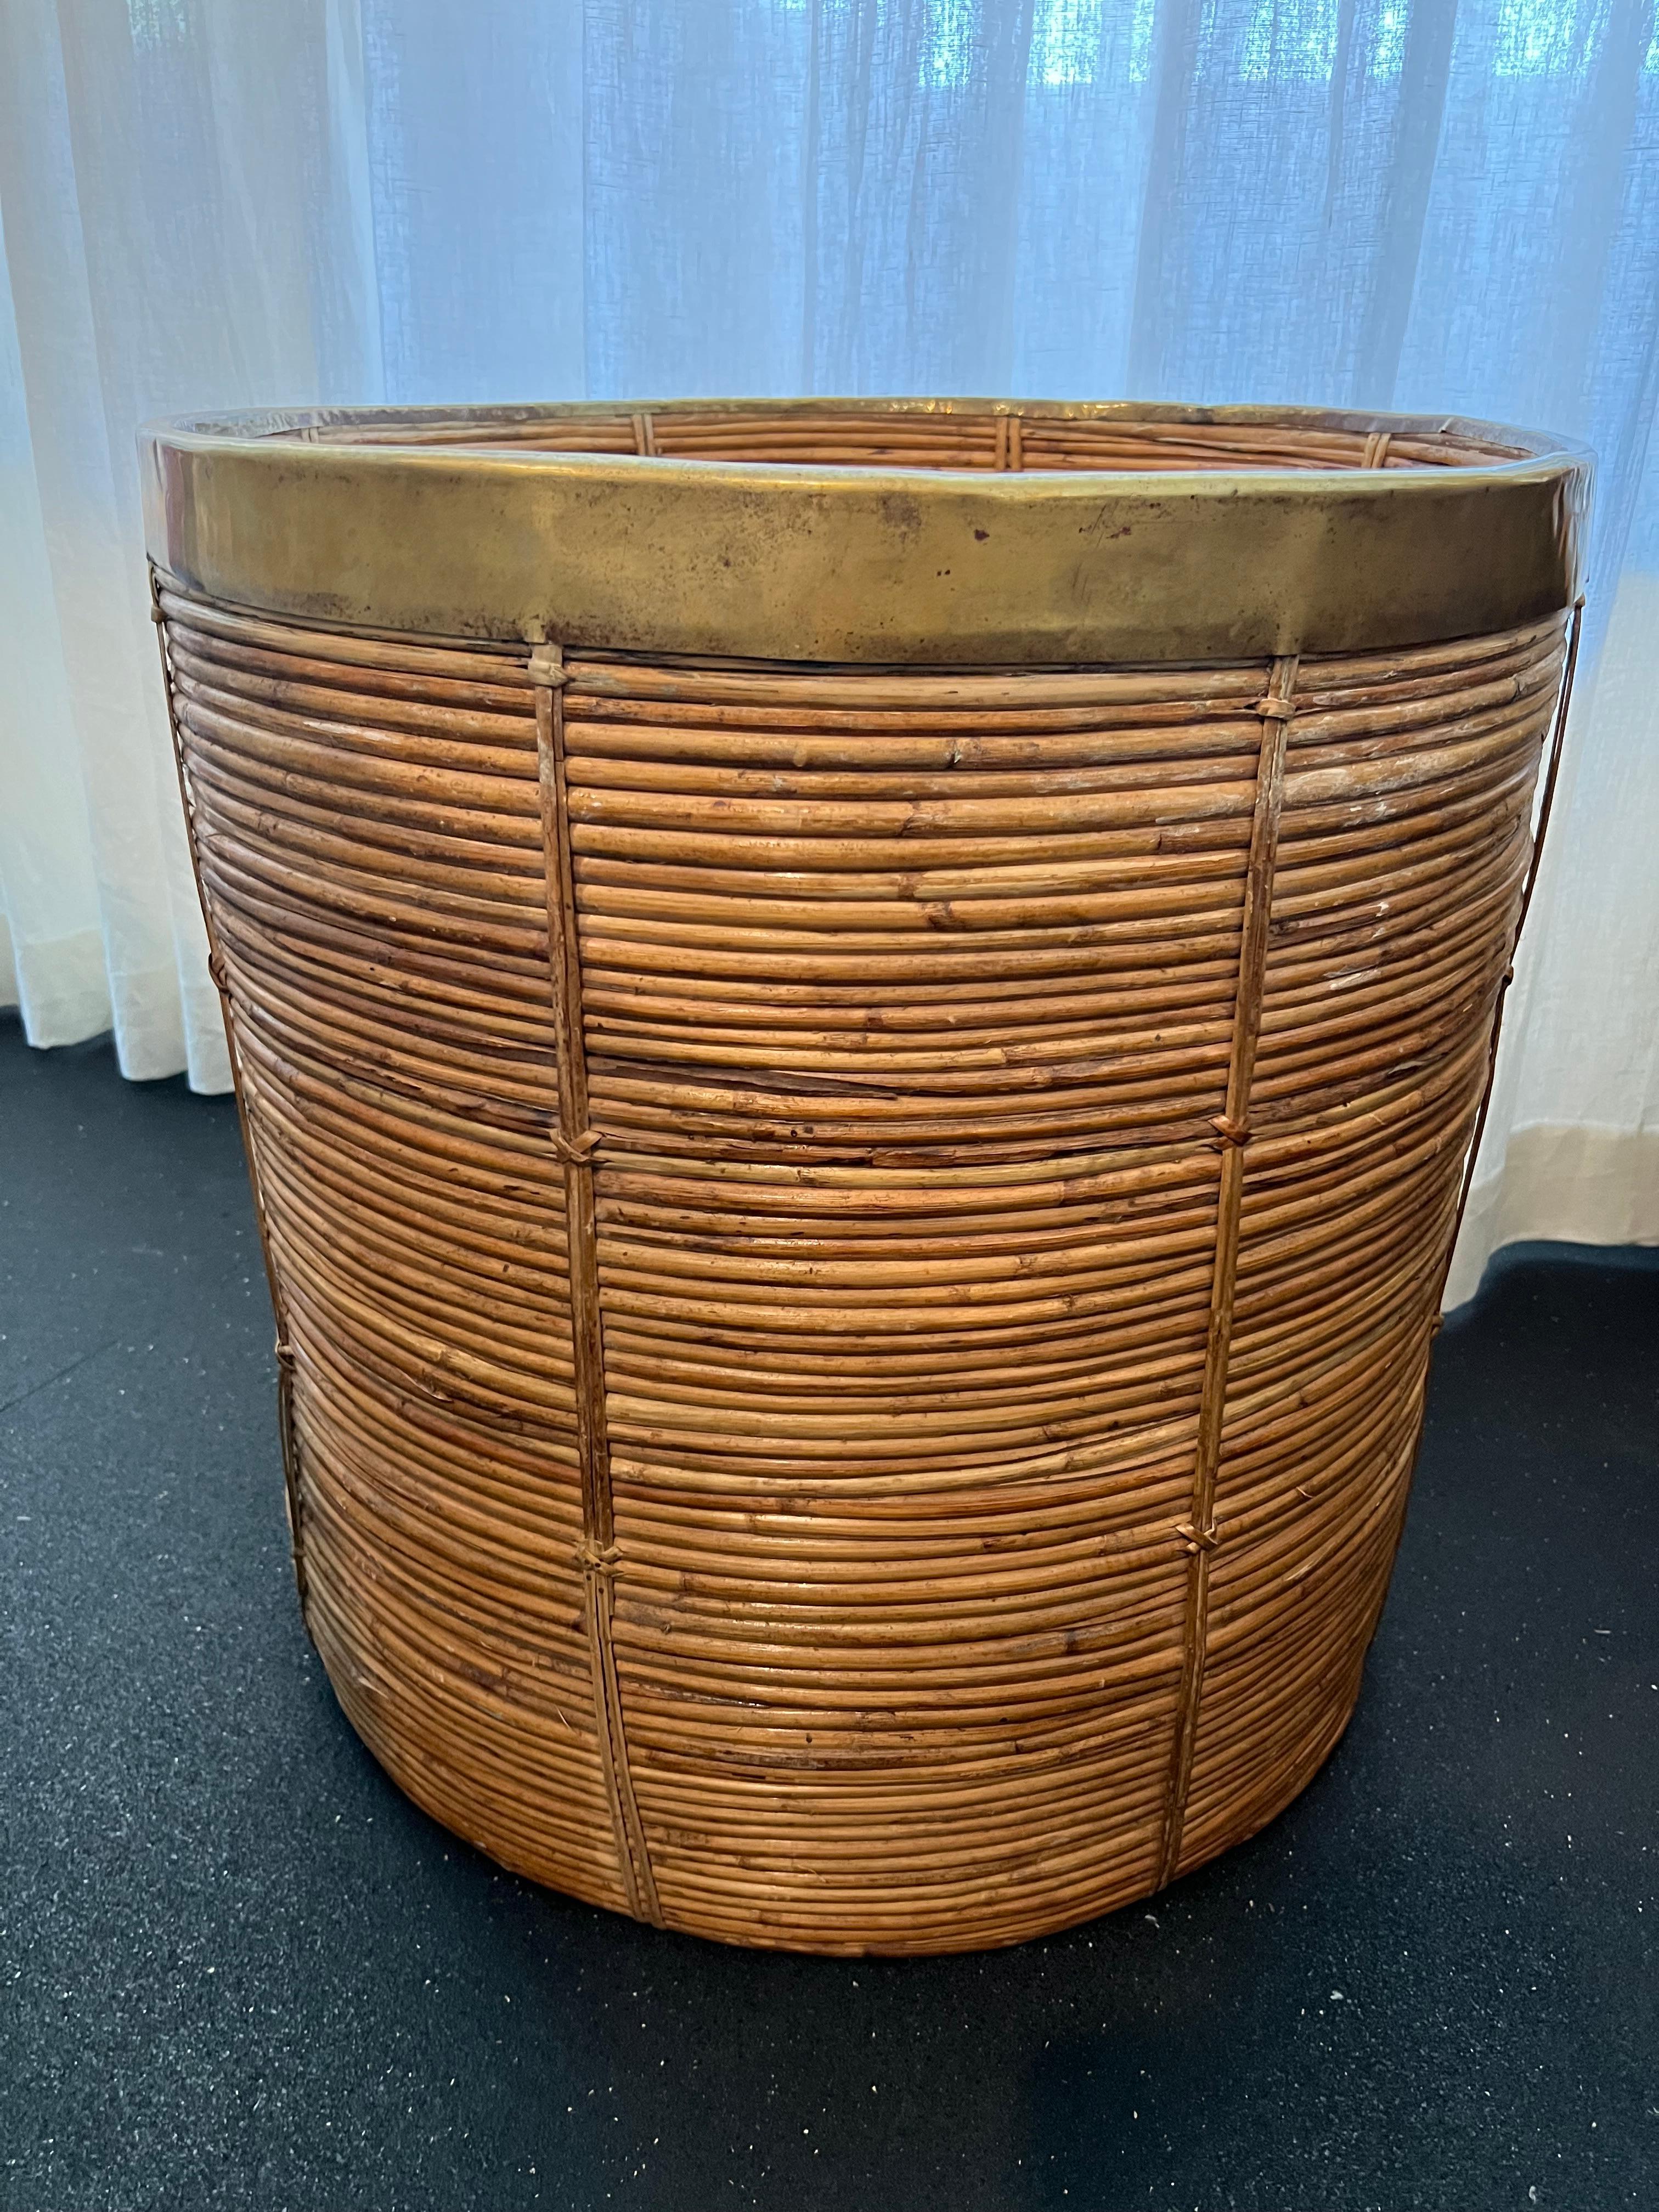 Monumental Gabriella Crespi style pencil reed basket with brass accents. Rare form. Additional photos available upon request.

Would work well in a variety of interiors such as modern, mid century modern, Hollywood regency, etc. Piece blends